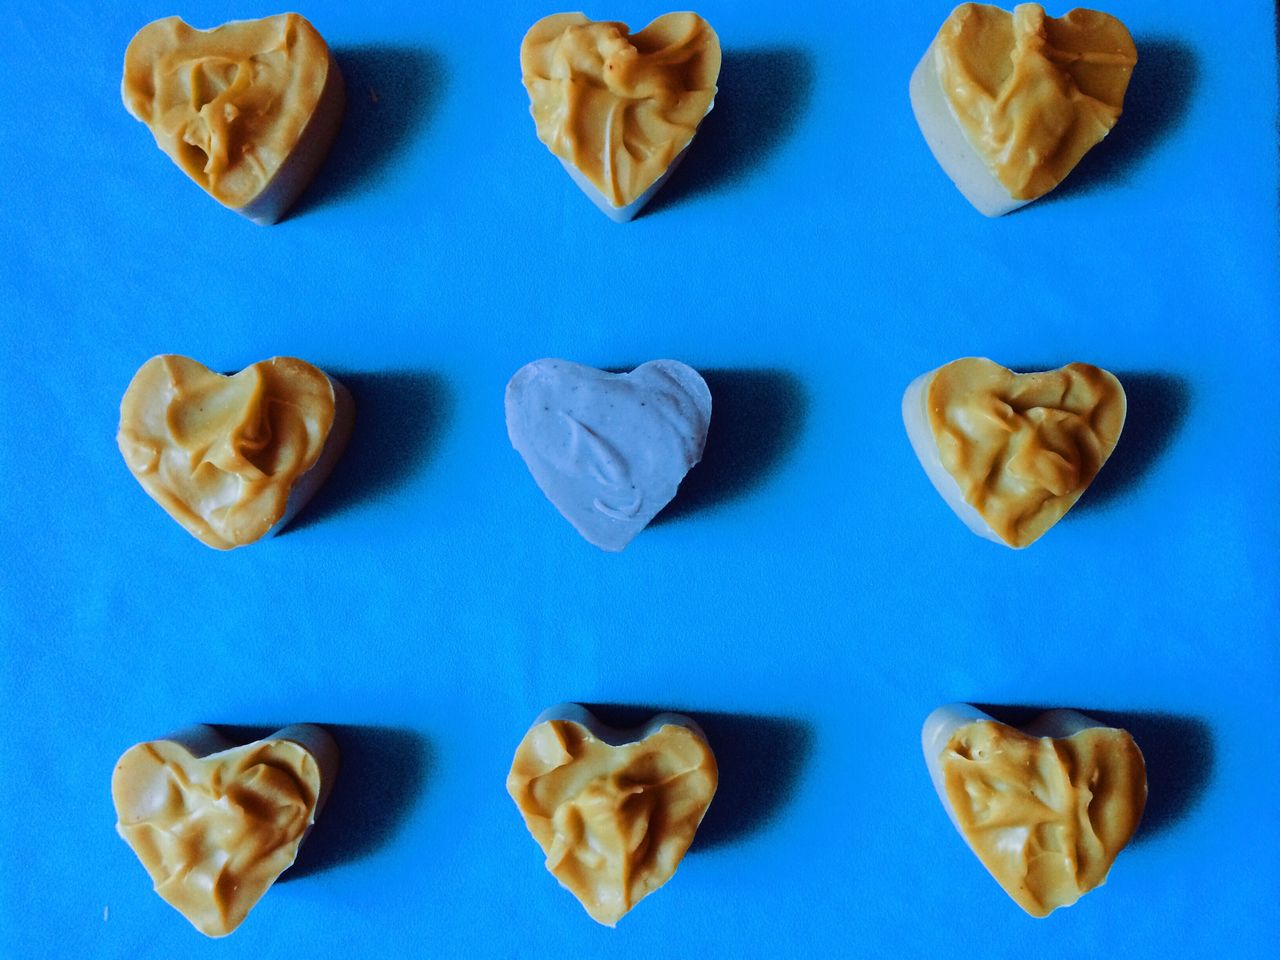 Directly above shot of heart shape soaps on blue background